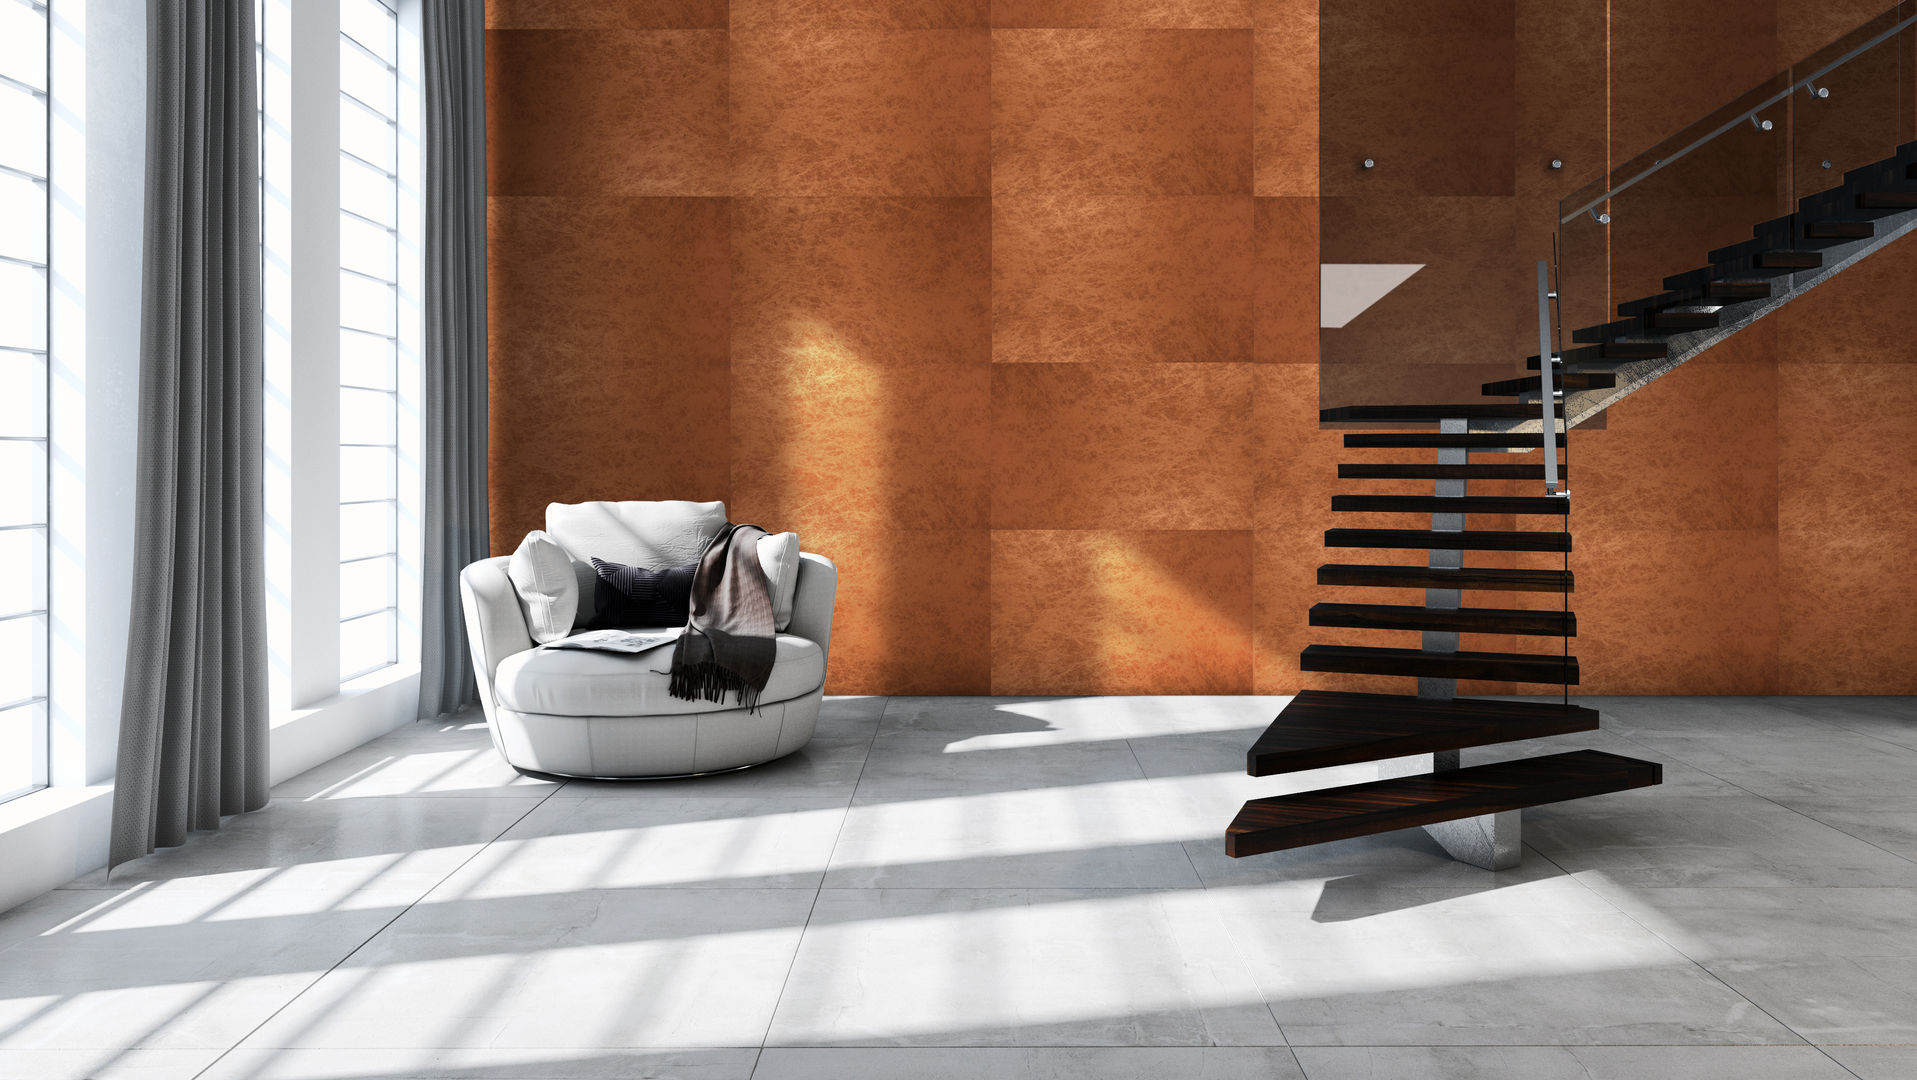 Metalegance Collection, Muratto | Cork Wall Design Muratto | Cork Wall Design Moderne Wohnzimmer